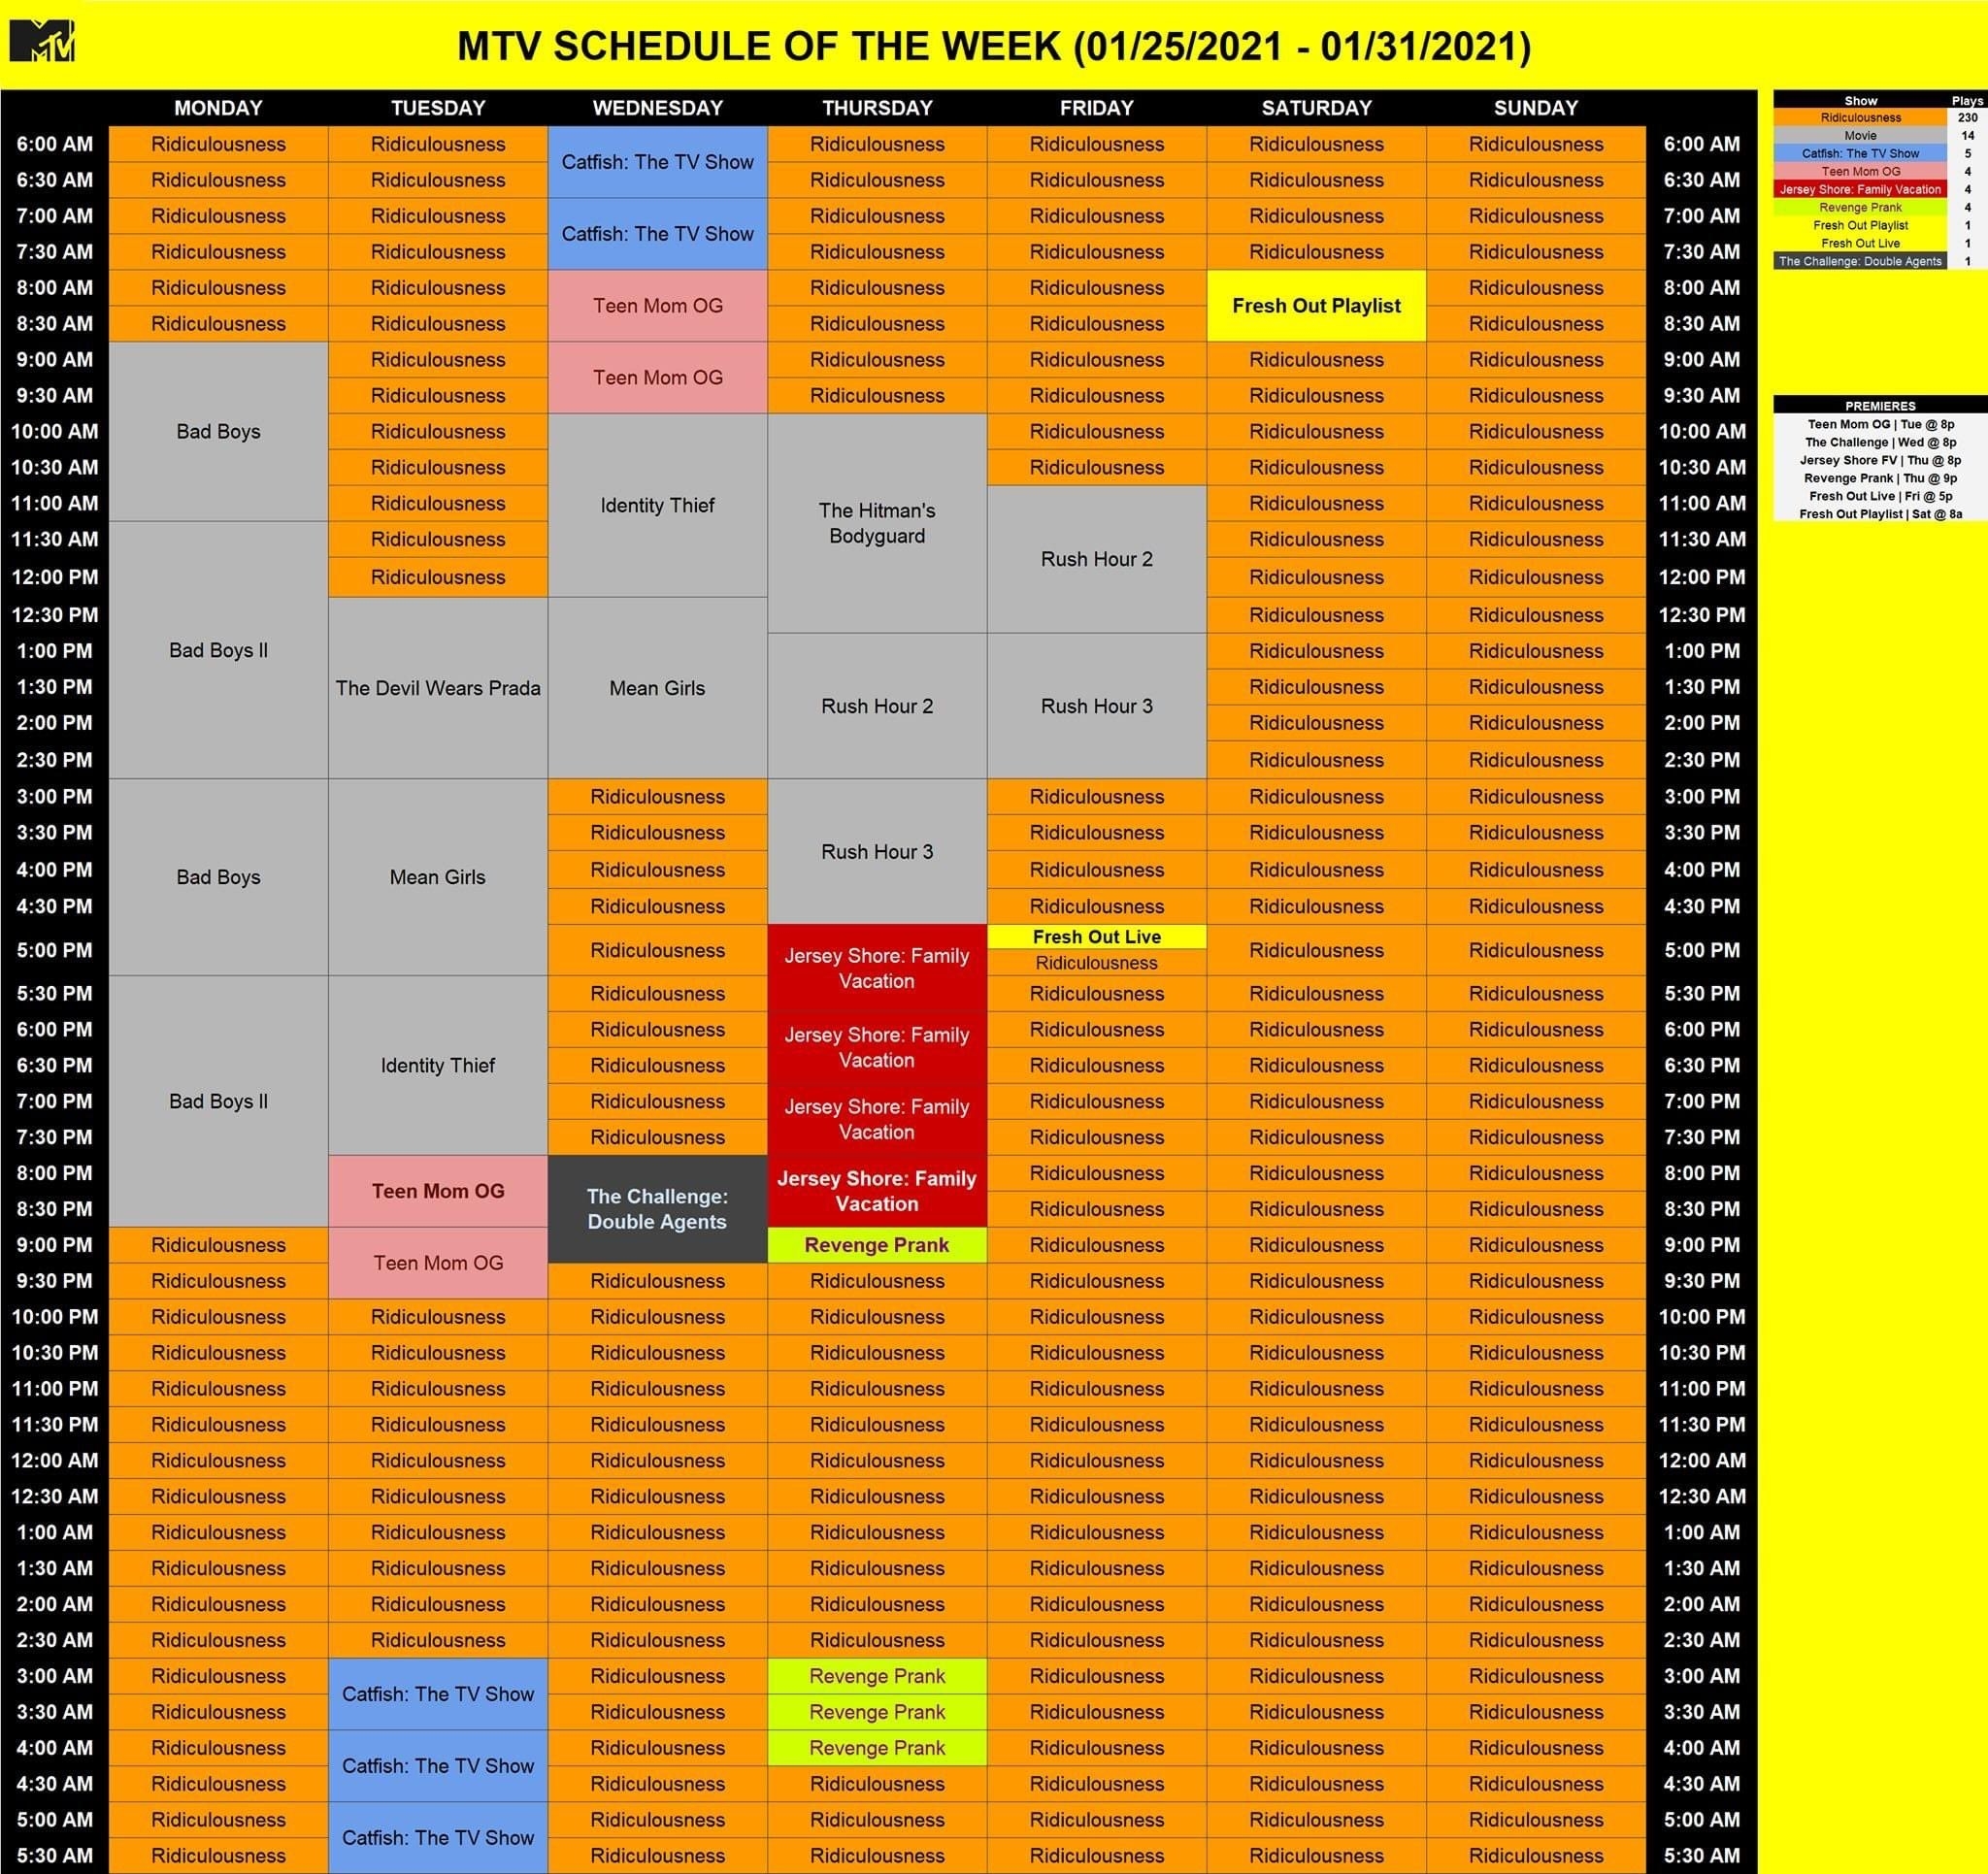 The MTV Schedule of the week (01/25/2021 - 01/31/2021) showing that almost all of the programming is episodes of  Ridiculousness